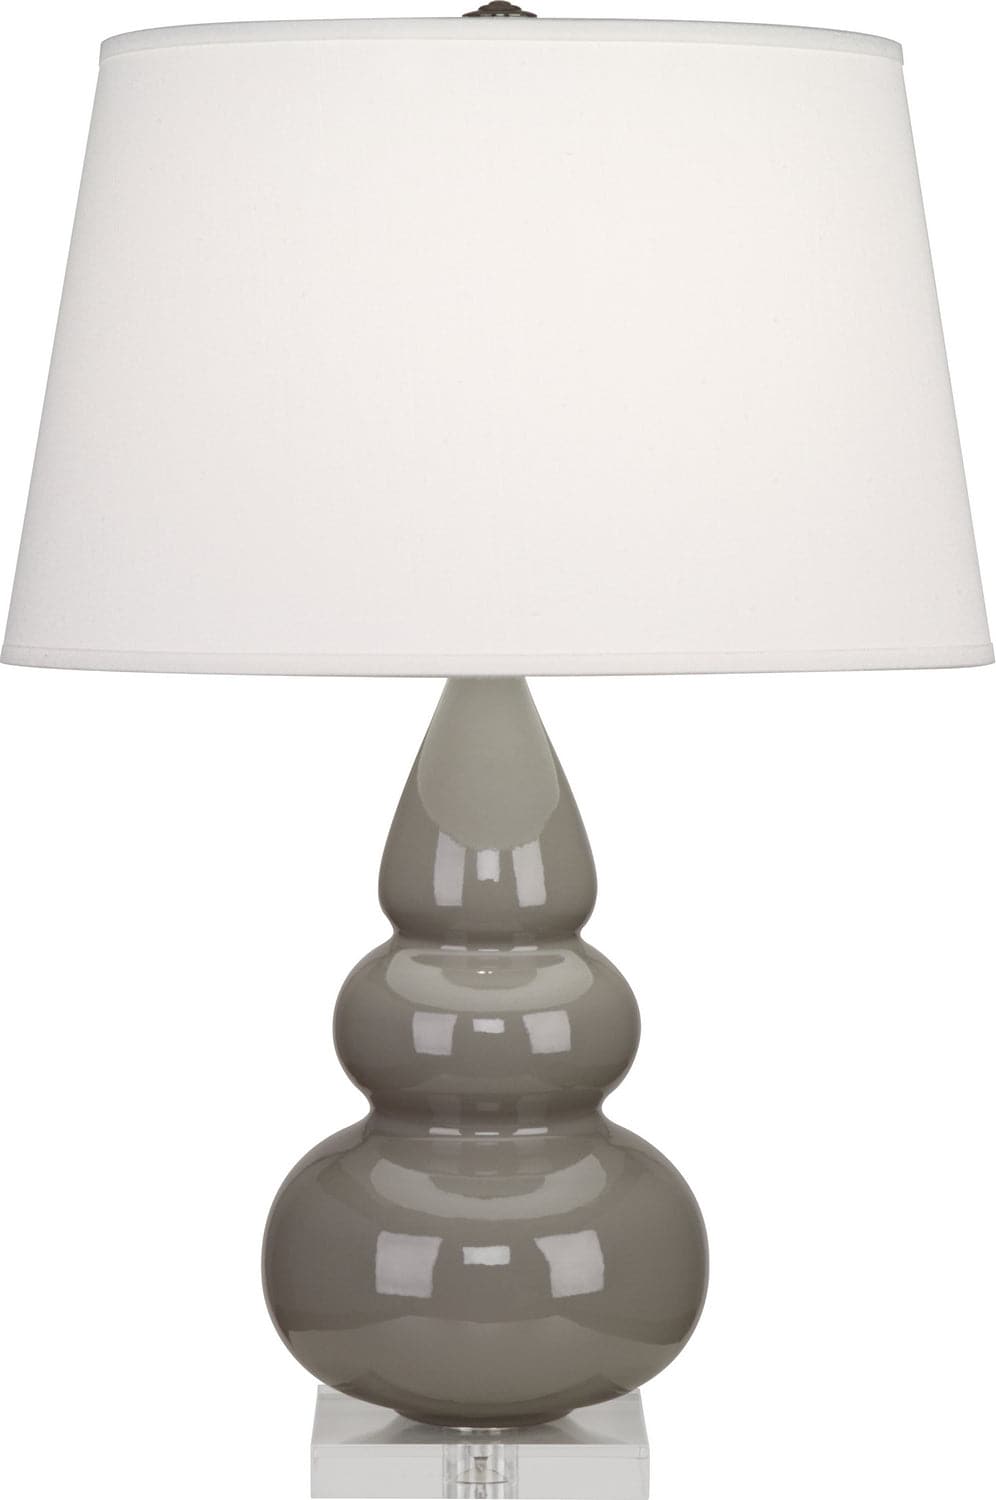 Robert Abbey - A289X - One Light Accent Lamp - Small Triple Gourd - Smoky Taupe Glazed w/Lucite Base